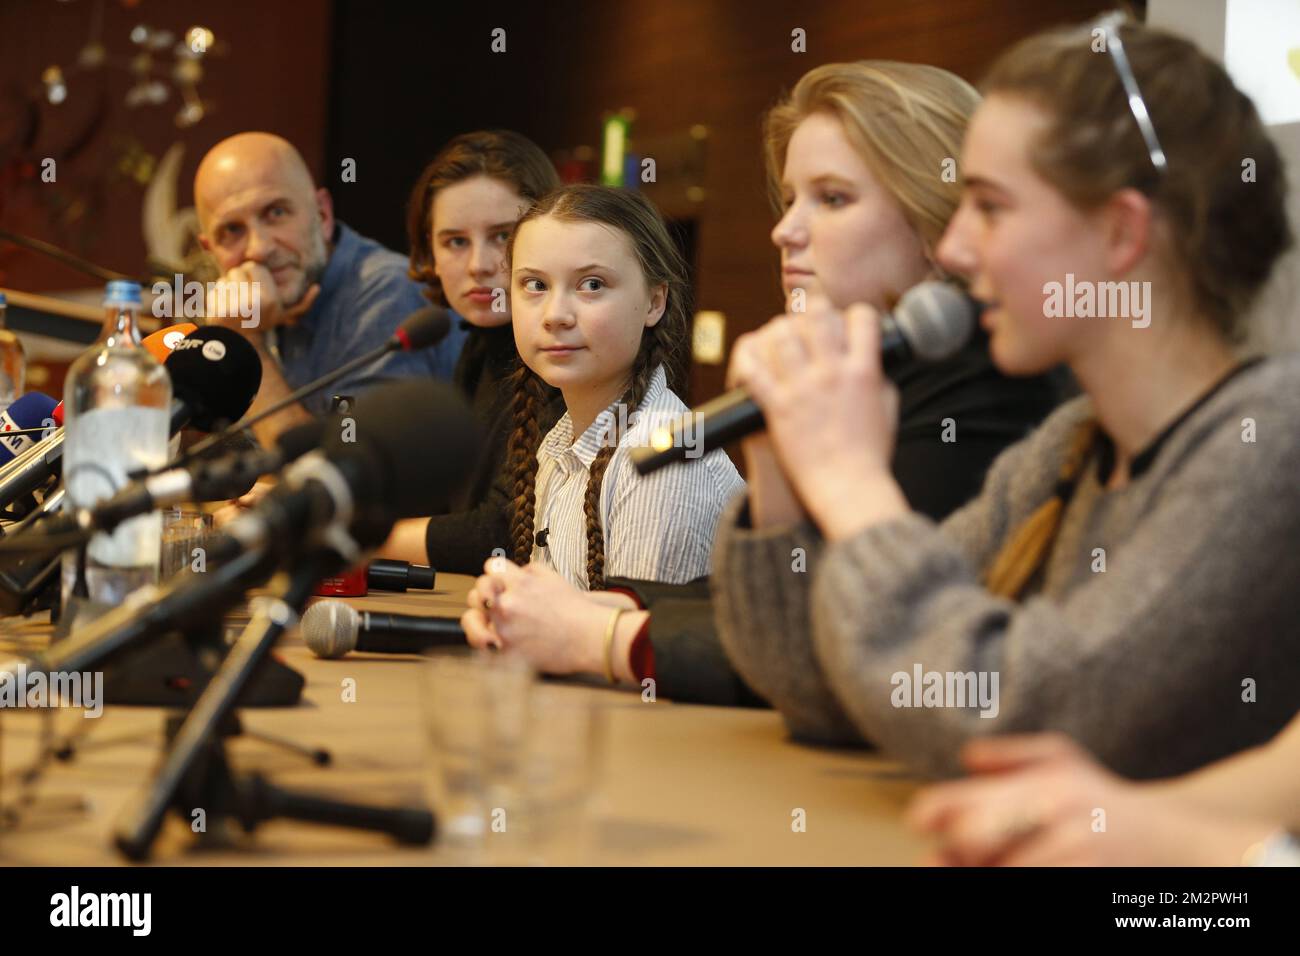 Nic Balthazar, climate activist Anuna De Wever, Swedish climate activist Greta Thunberg, climate activist Kyra Gantois and climate activist Adelaide Charlier pictured during a press conference following a student strike action, organized by 'Youth For Climate', urging pupils to skip classes to protest a lack of climate awareness, Thursday 21 February 2019 in Brussels. This marks the seventh consecutive week youths take the streets on Thursday. The action is inspired by the 'School Strike' of Swedish 15-year-old Greta, joining the protests in Brussels today. BELGA PHOTO NICOLAS MAETERLINCK  Stock Photo